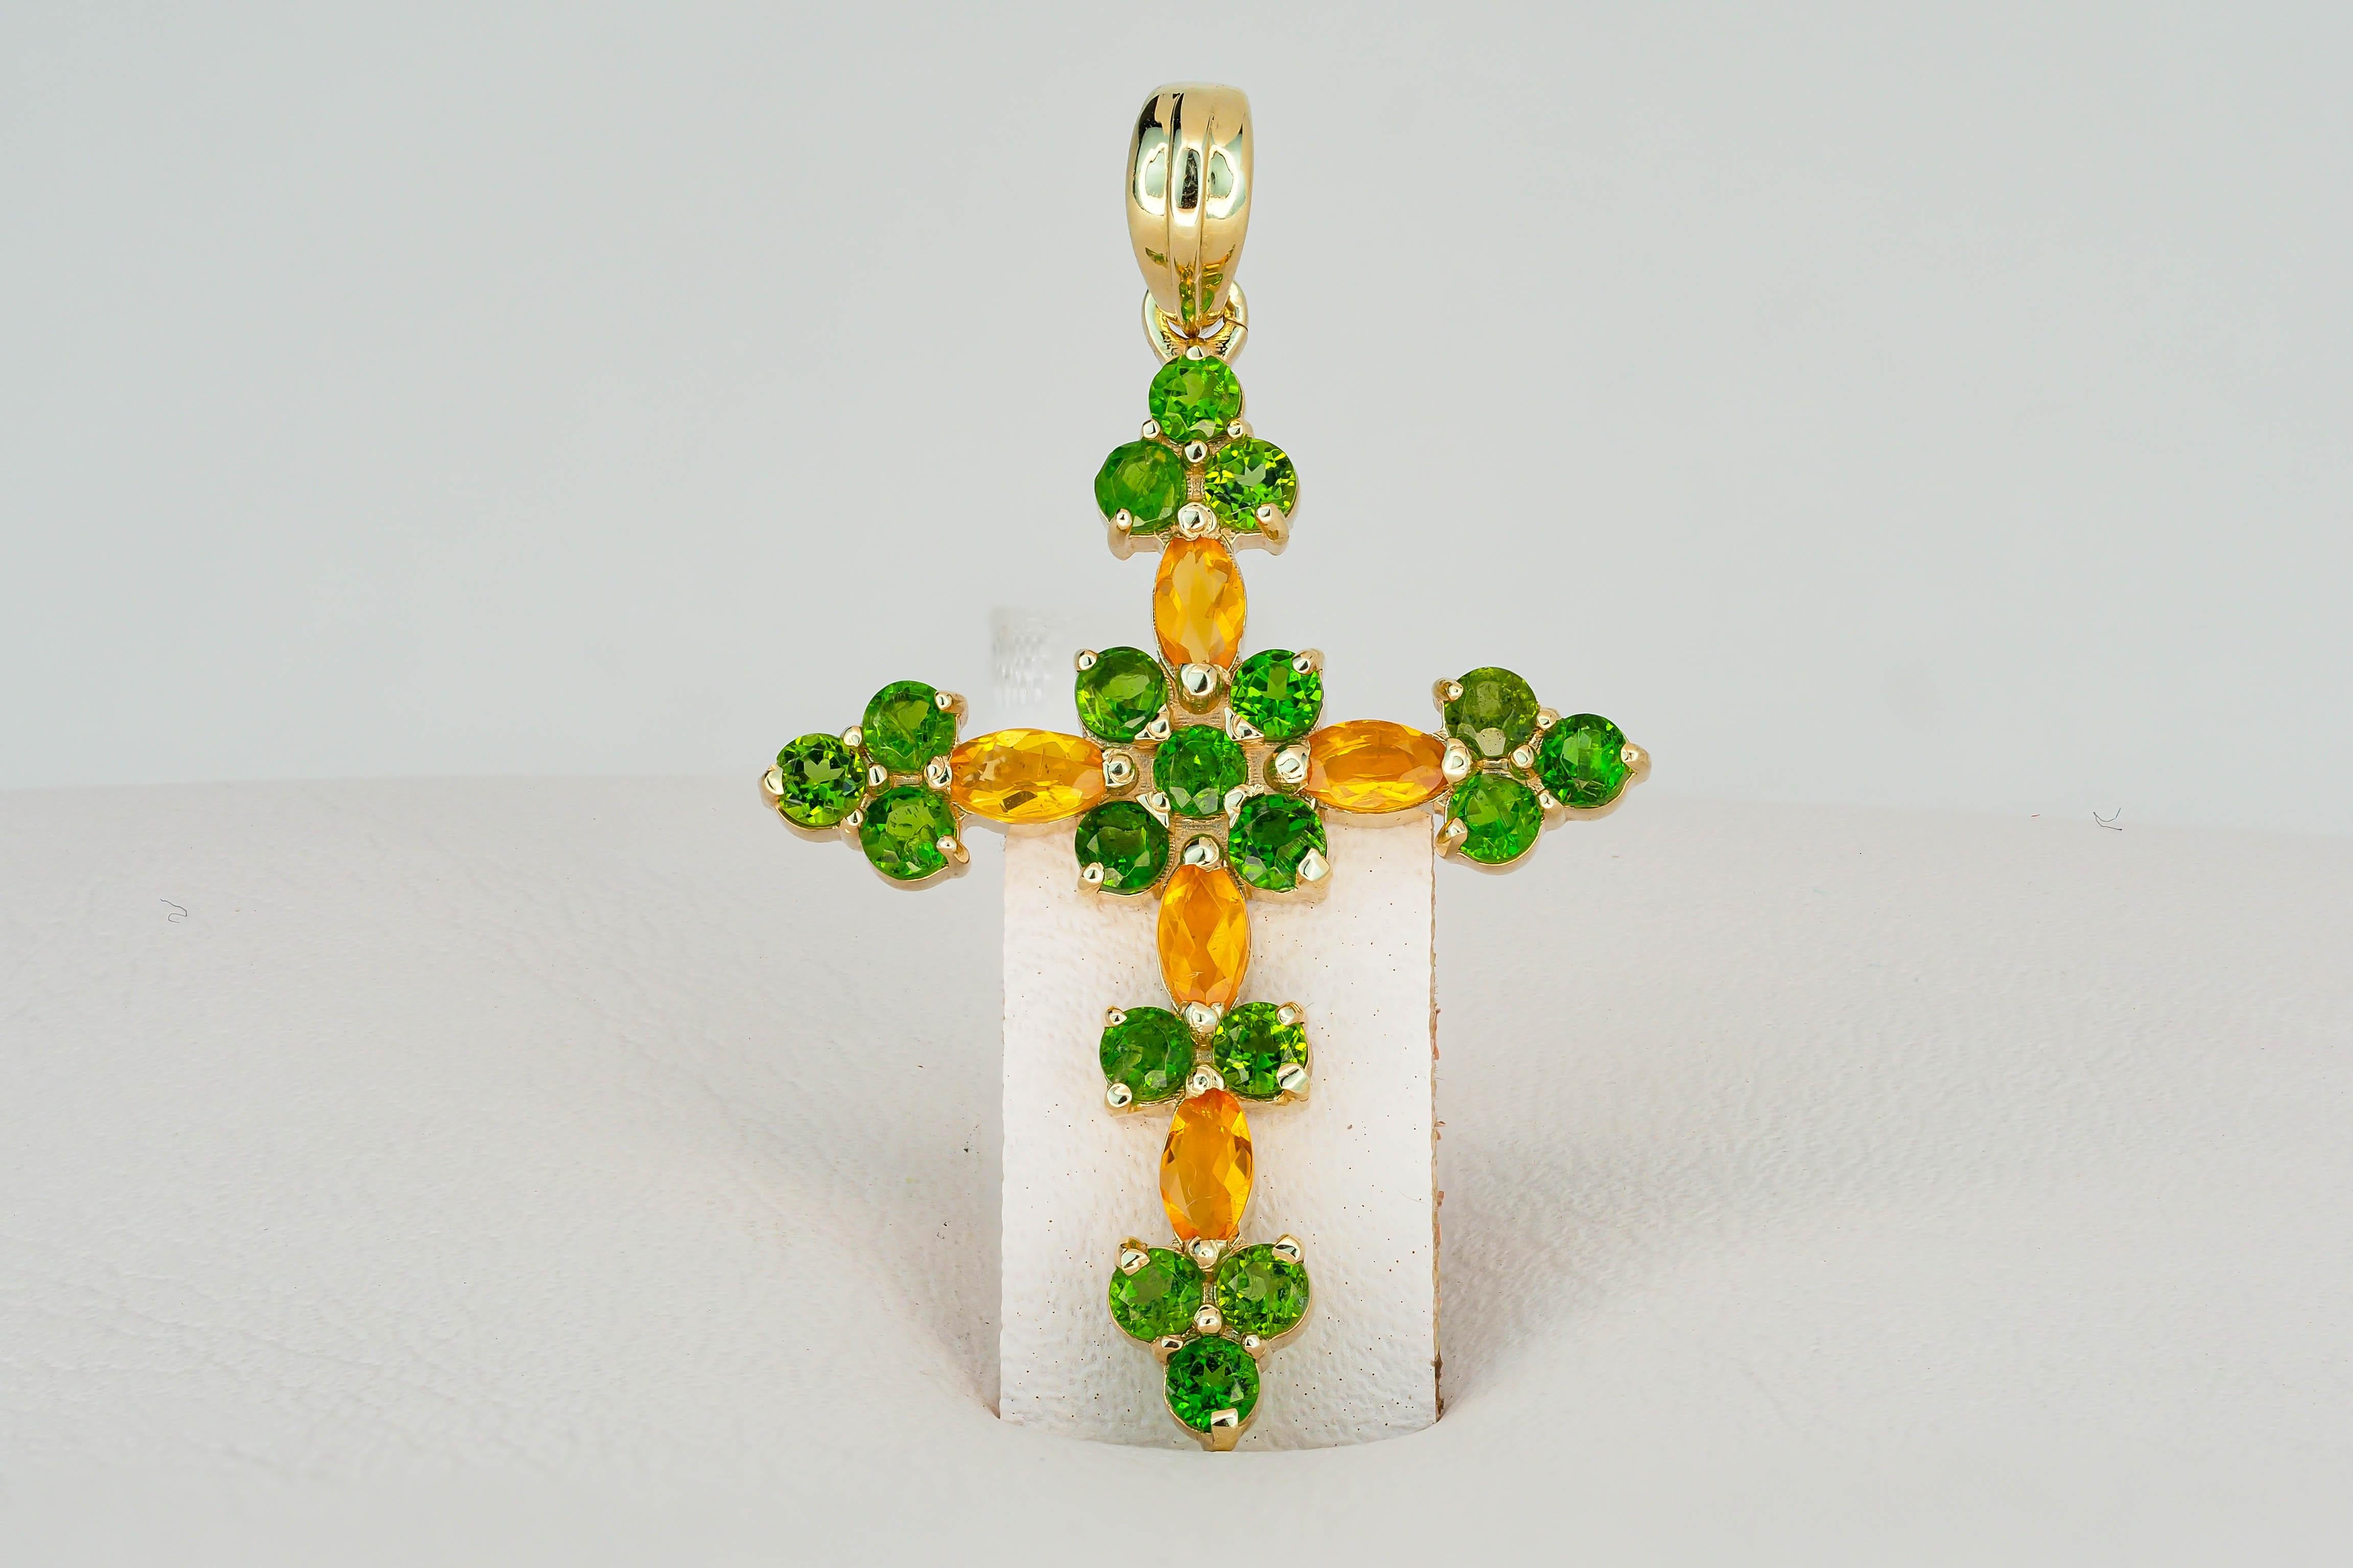 Marquise Cut 14k Gold Cross Pendant with Colored Stones Opals and Tsavorites